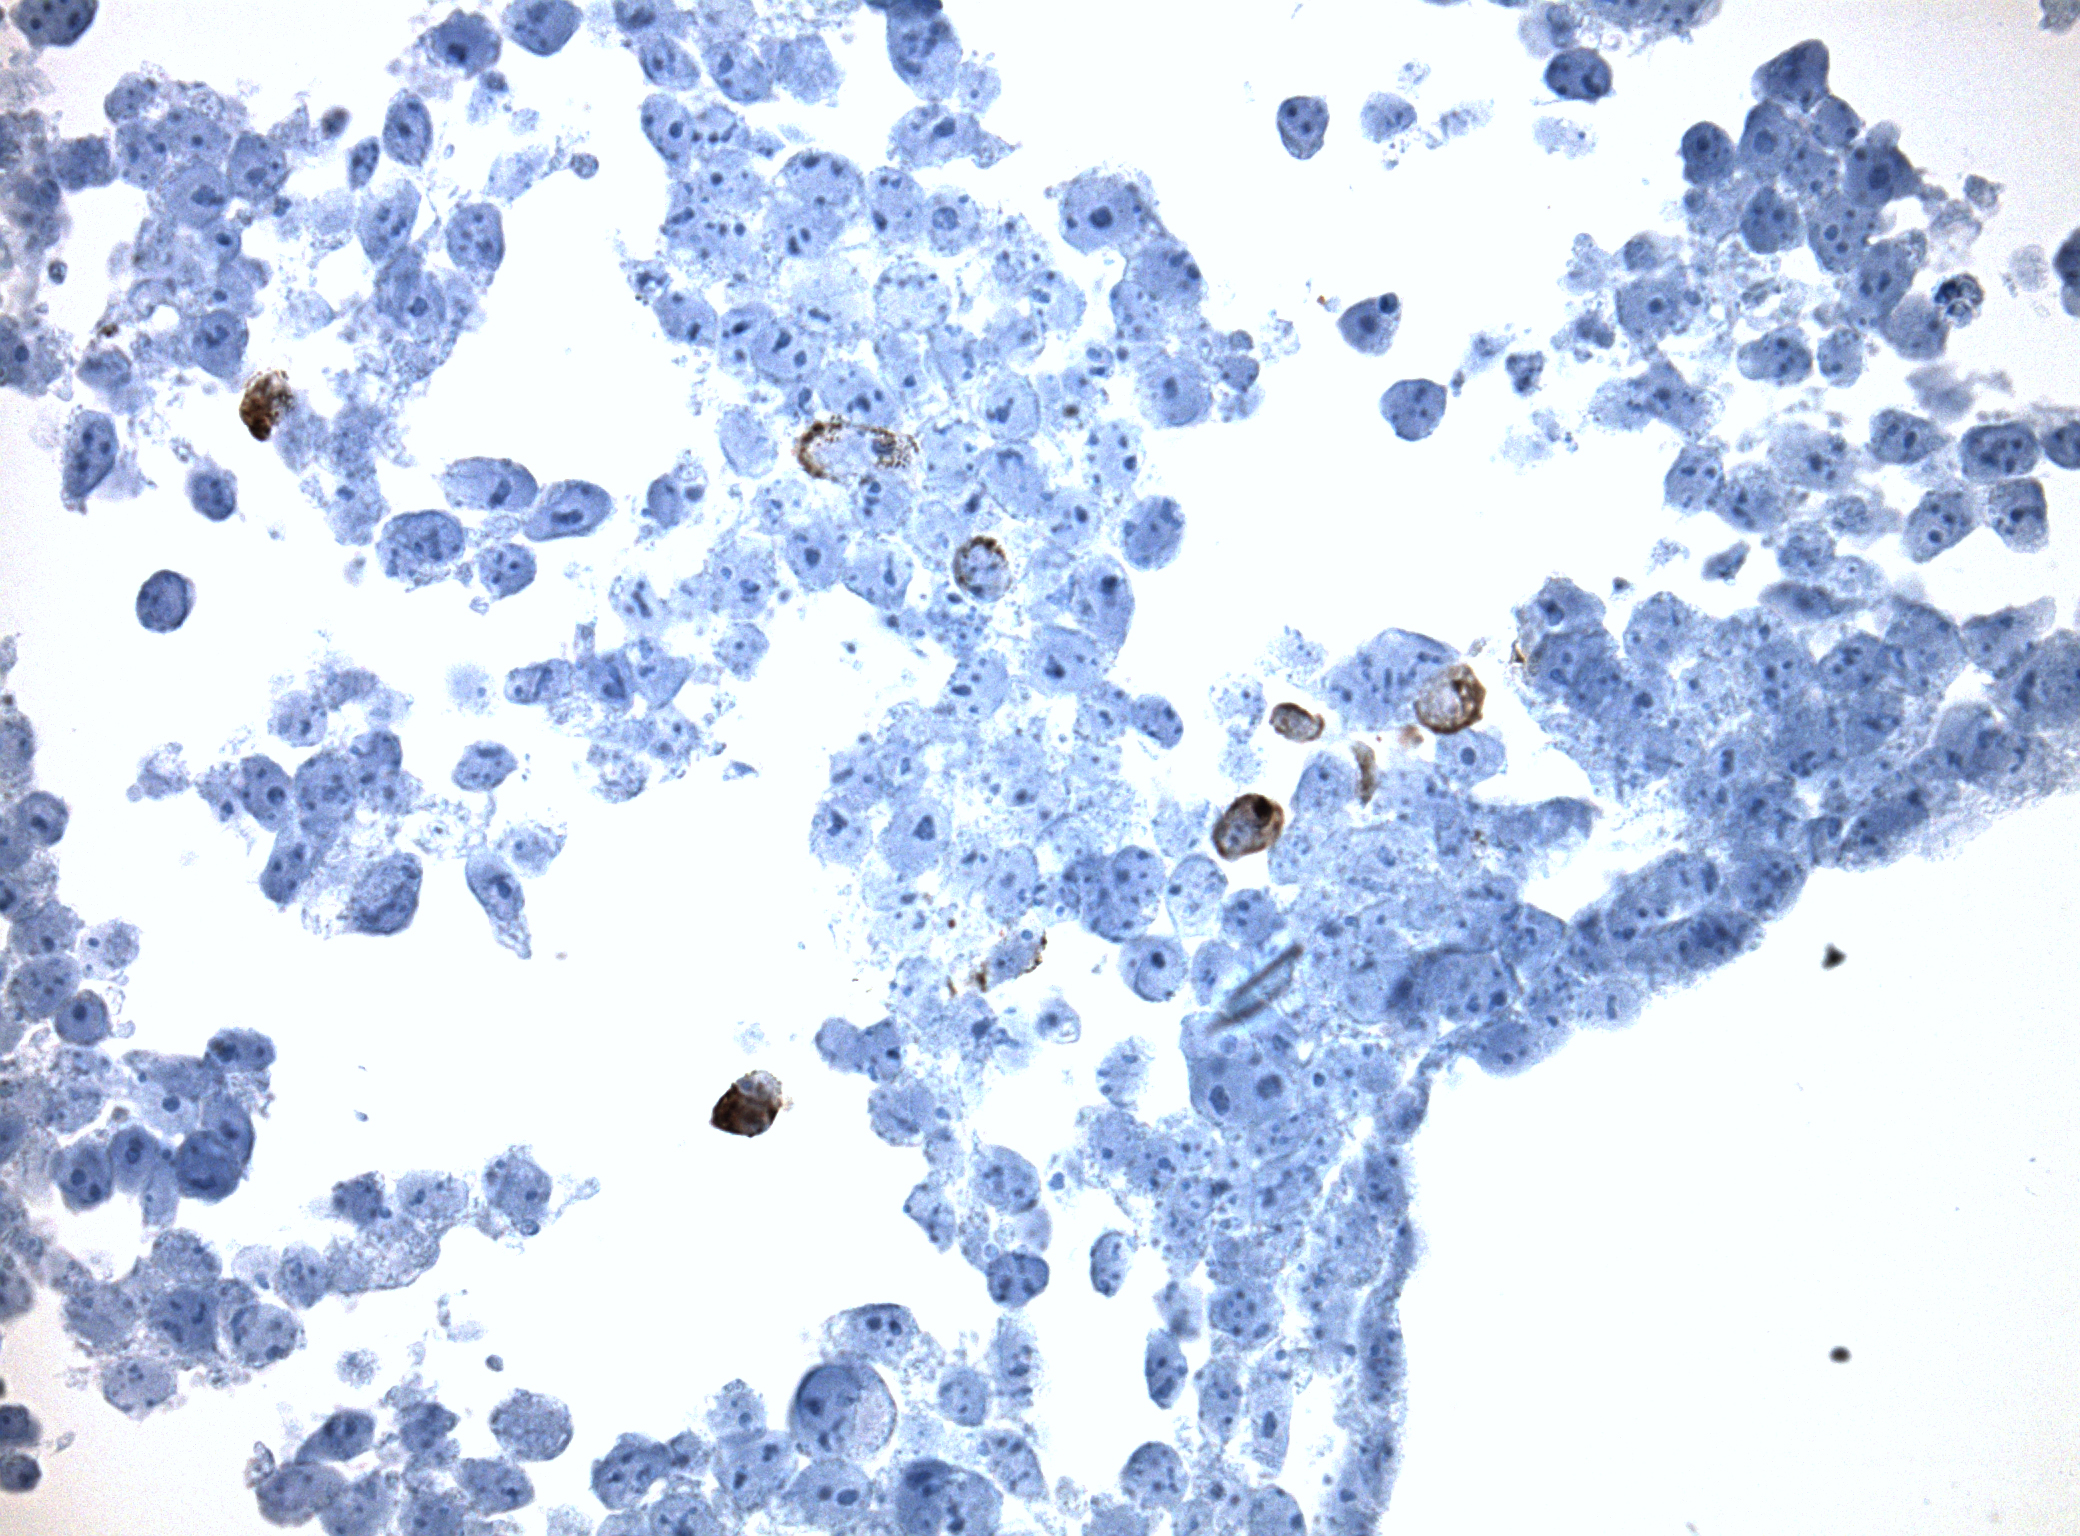 Immunohistology staining on ULBP3 overexpressed cytosection TS419672P5 with mouse anti DDK clone OTI11C3 C/N TA180144 at 1:400 dilution 4C O/N. Antibody staining was achieved with HIER Citrate pH6 , Polink1 with DAB chromogen detection kit (D11-18). Positive stain shown with the brown chromogen present. HEK293T cells were transfected with cDNA clone RC419672, 5 micron sections, 40x magnification